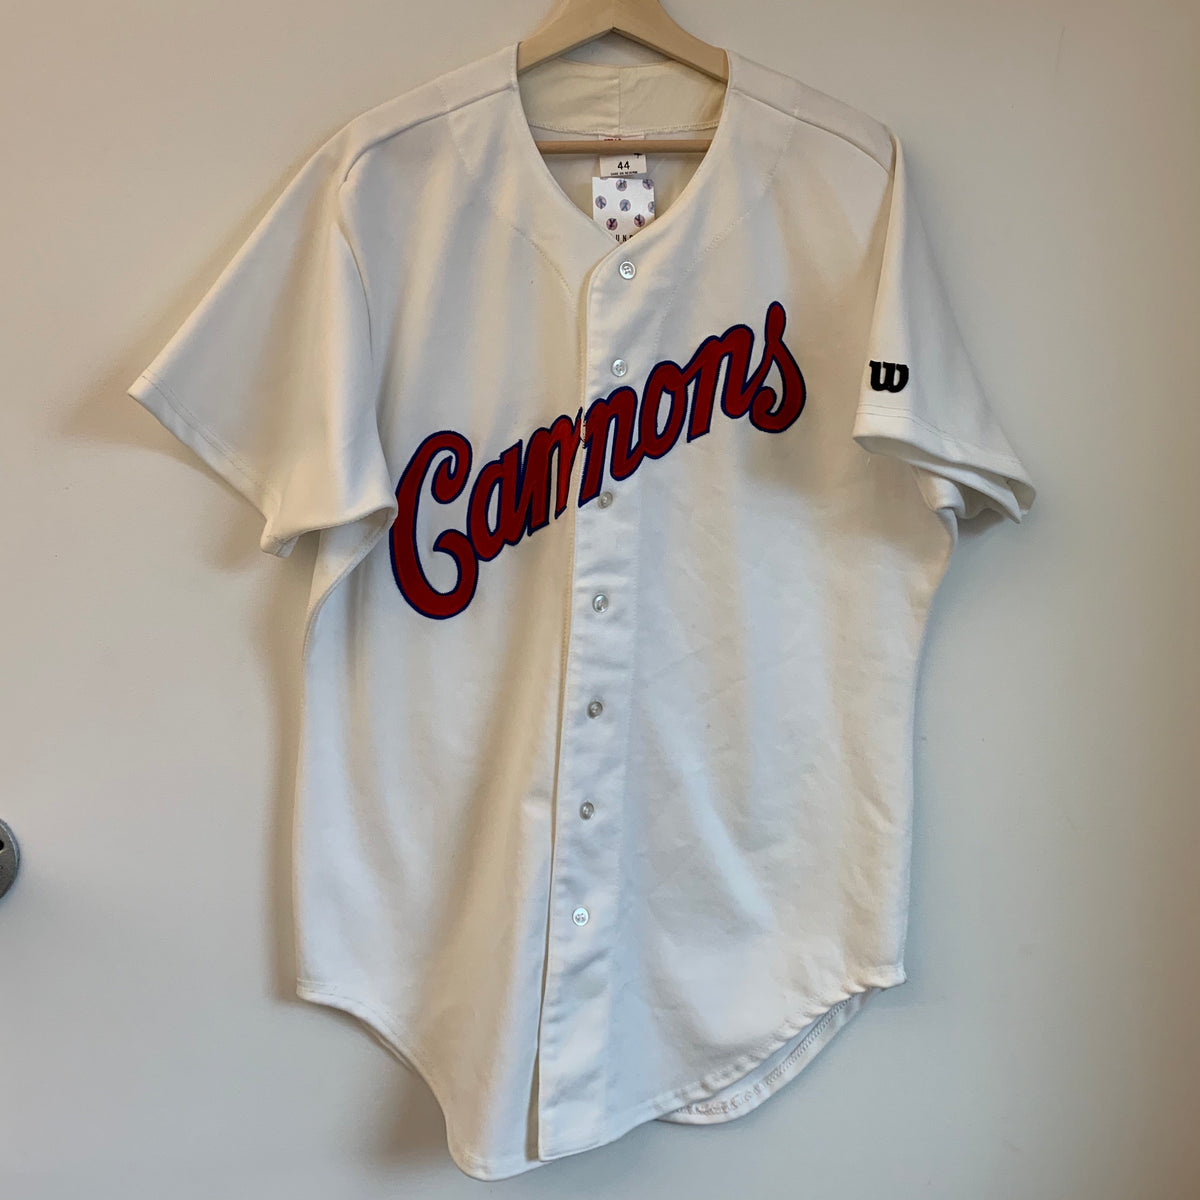 Vintage 60s Wilson Baseball Jersey, Stains throughout